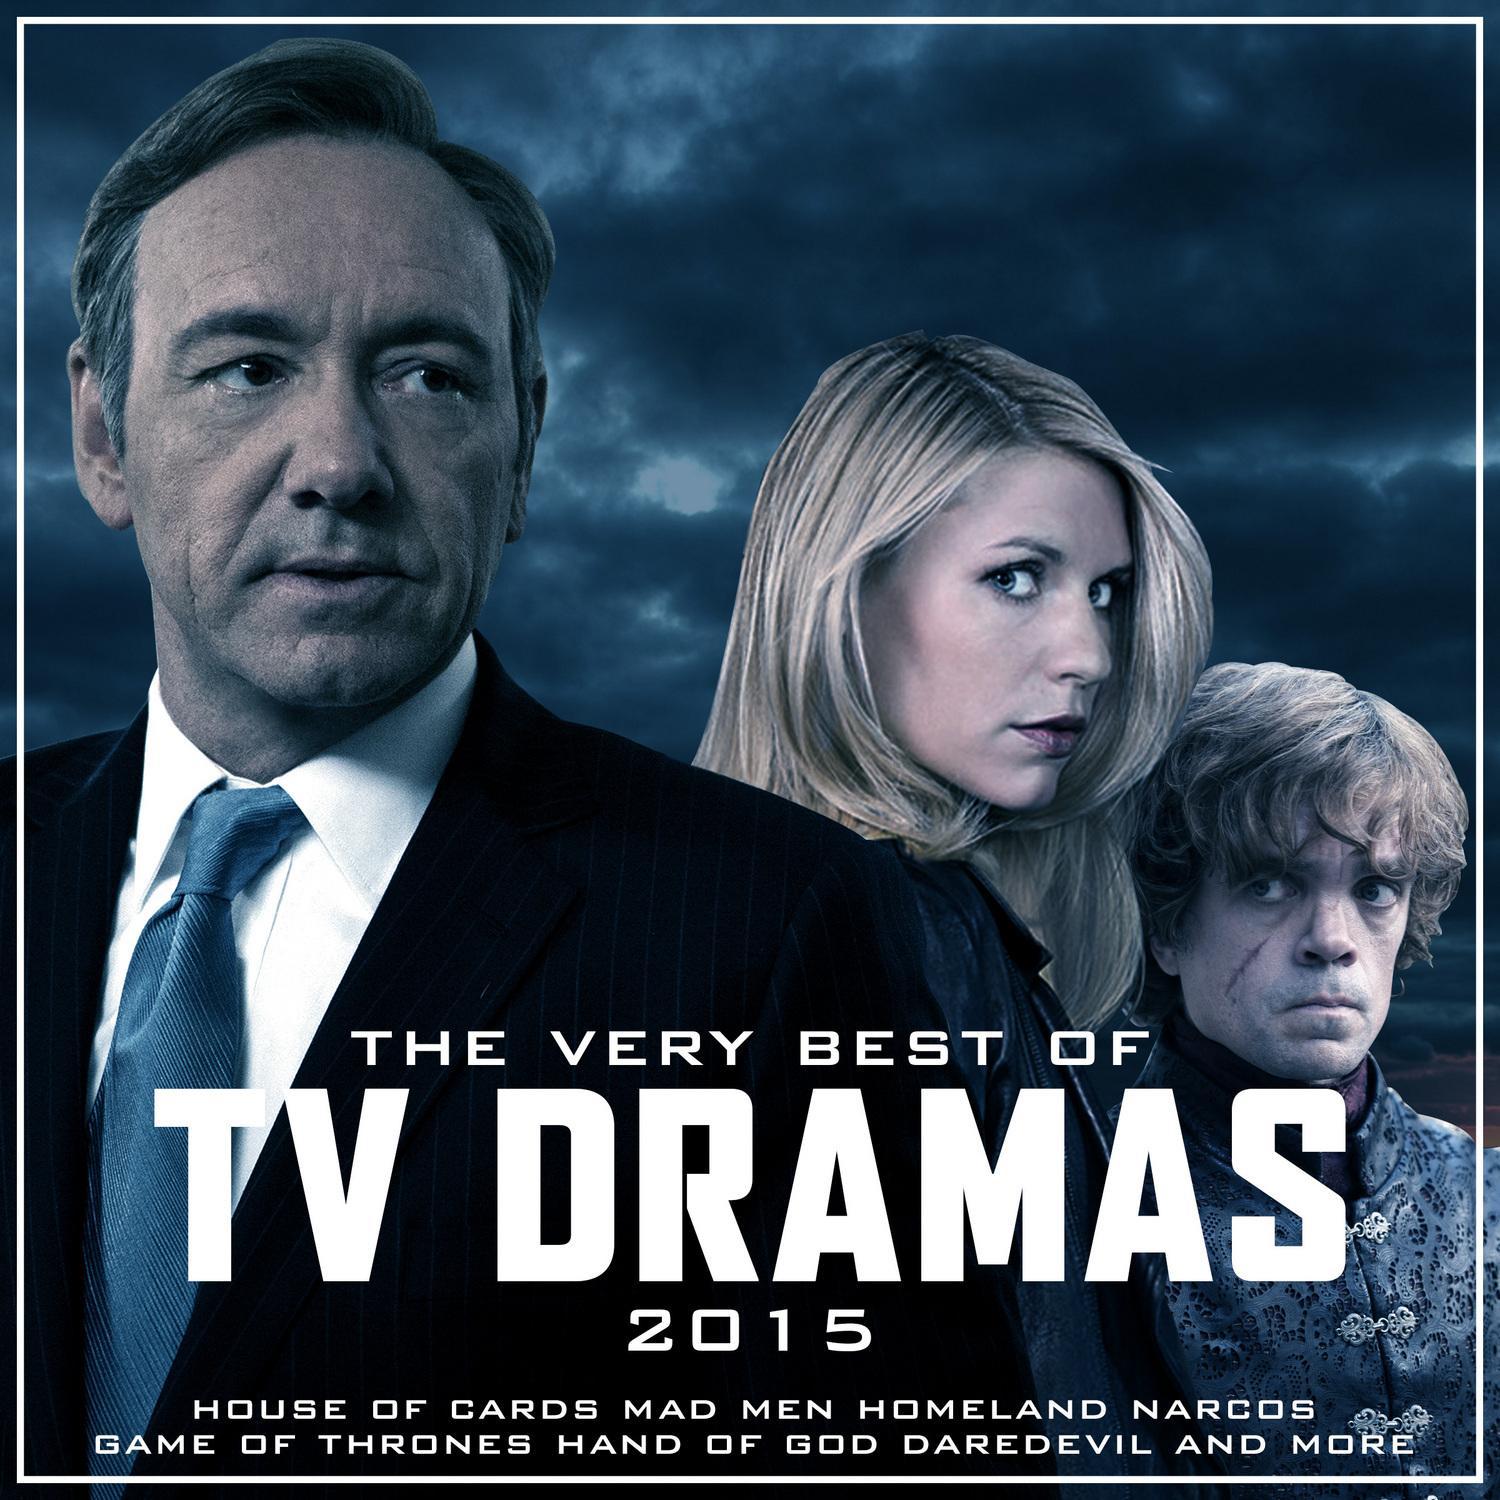 The Very Best of Tv Crime Dramas 2015专辑